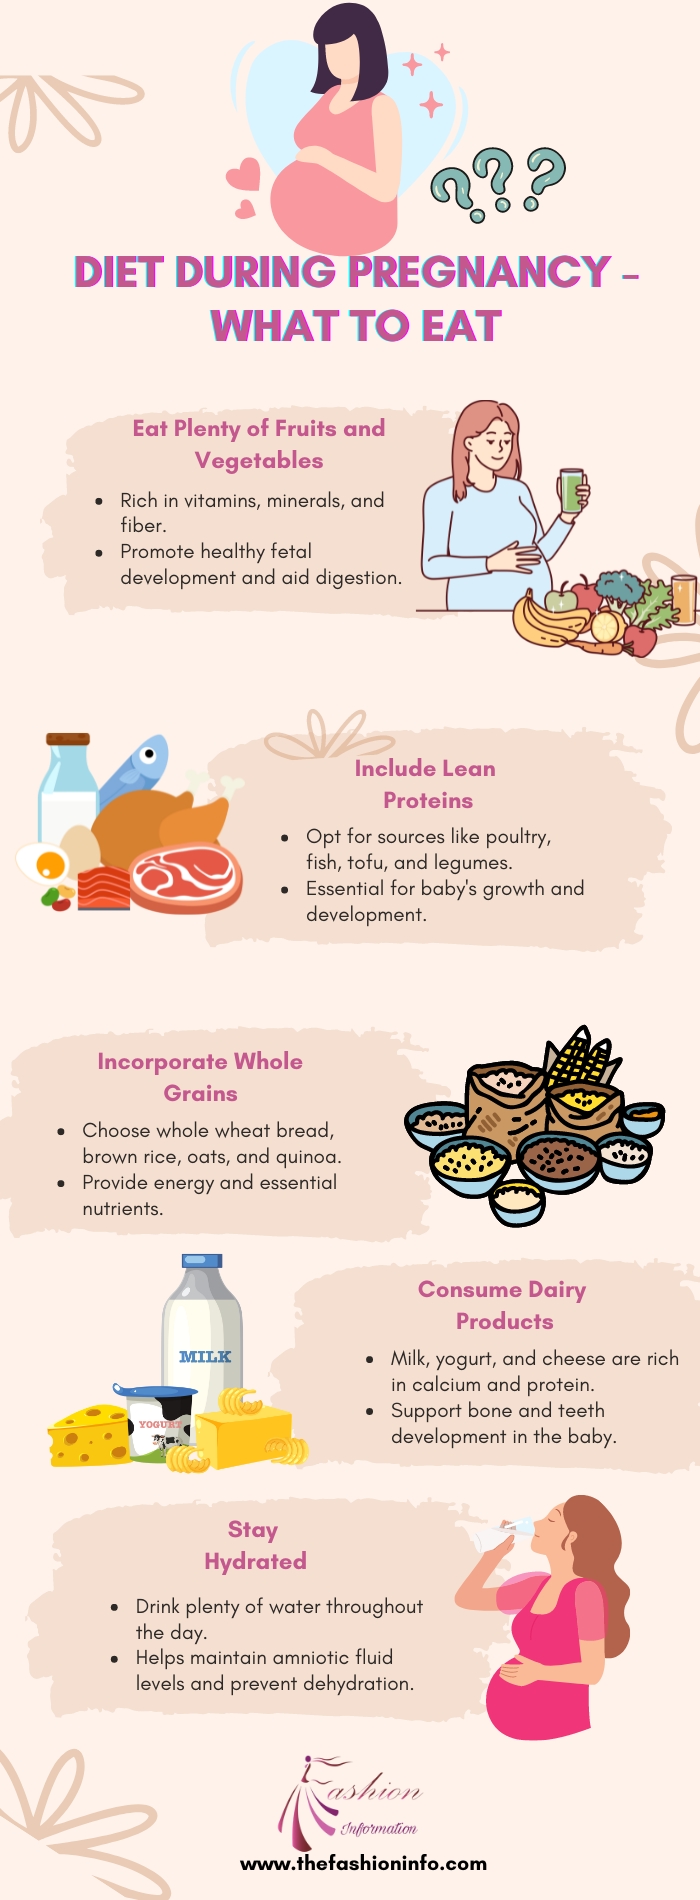 Diet During Pregnancy   What to Eat